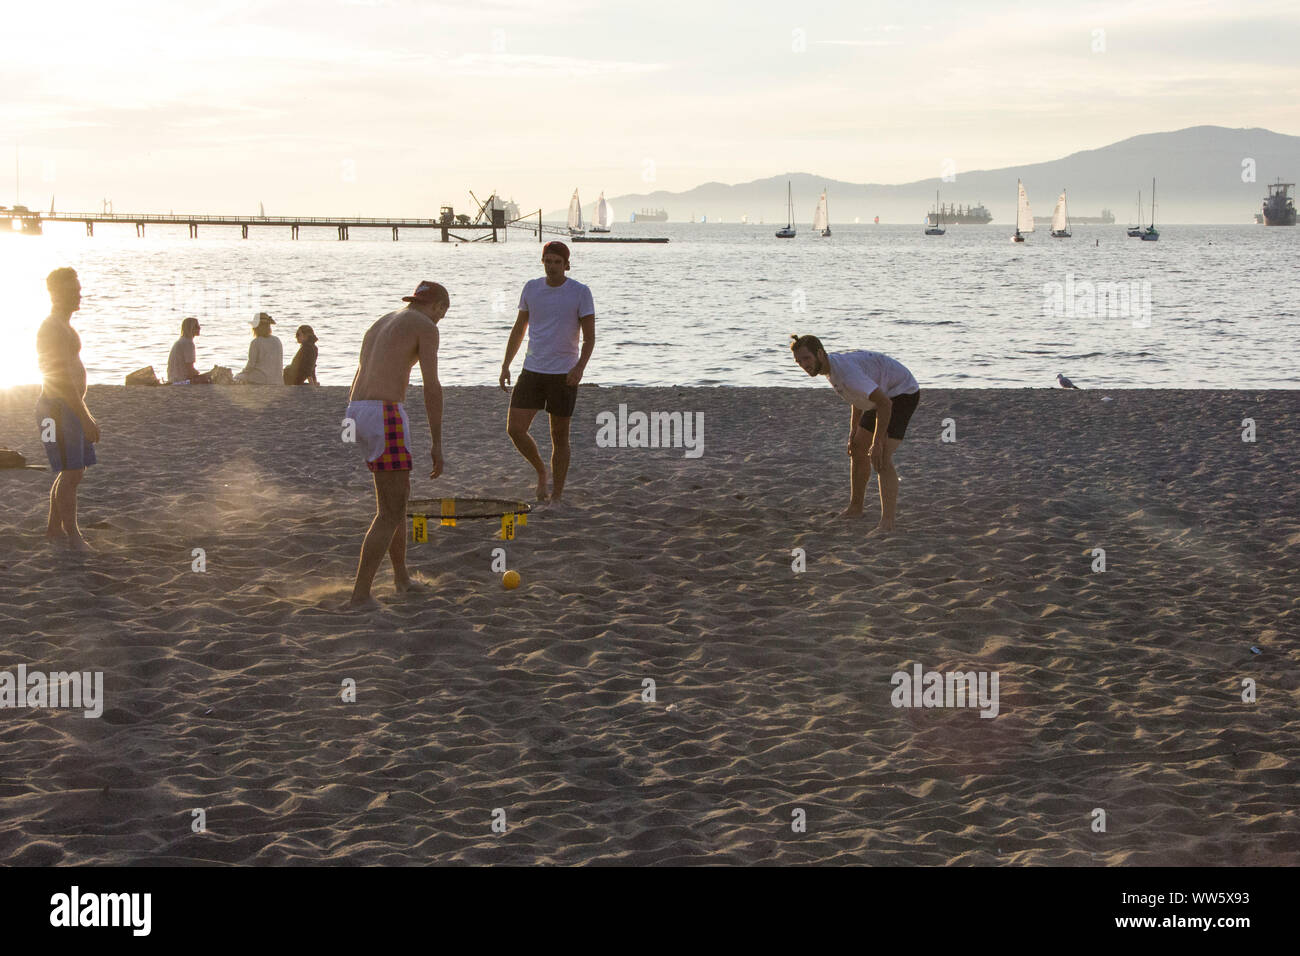 Men playing with a ball on the beach, container ships in the horizon, English Bay, Vancouver Stock Photo